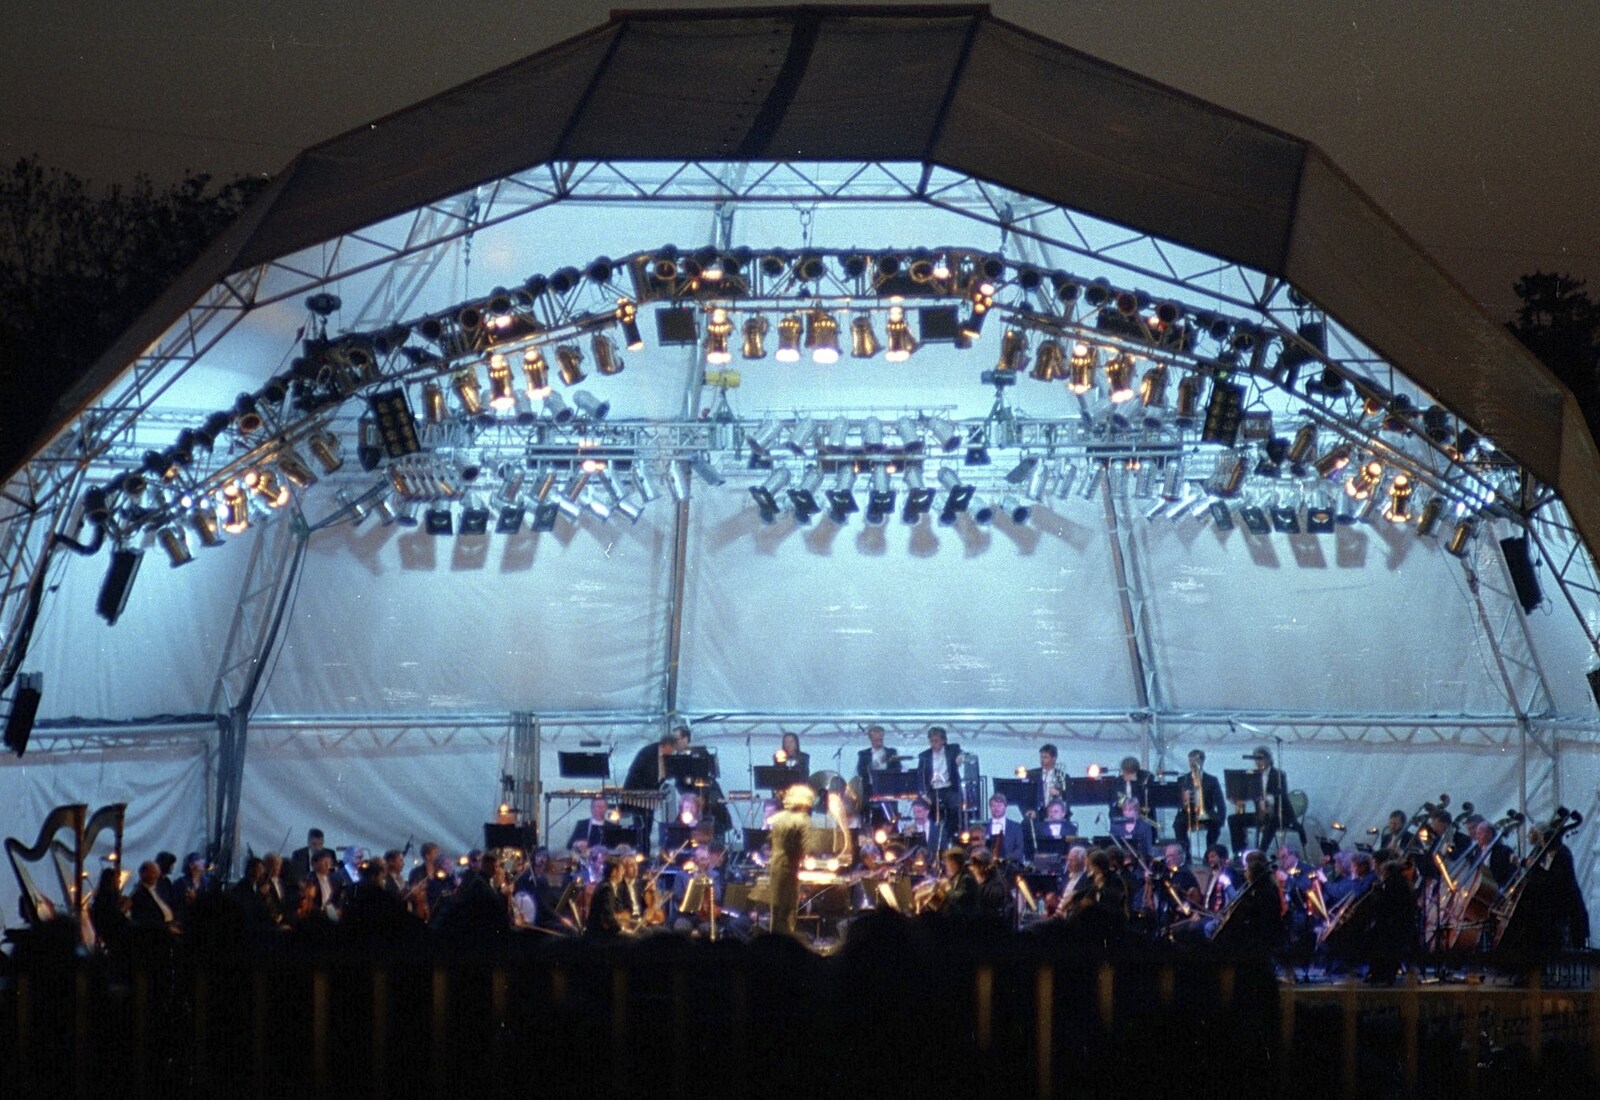 Earlham Classics, Earlham Park, Norwich, Norfolk - 9th May 1992: The orchestra on stage